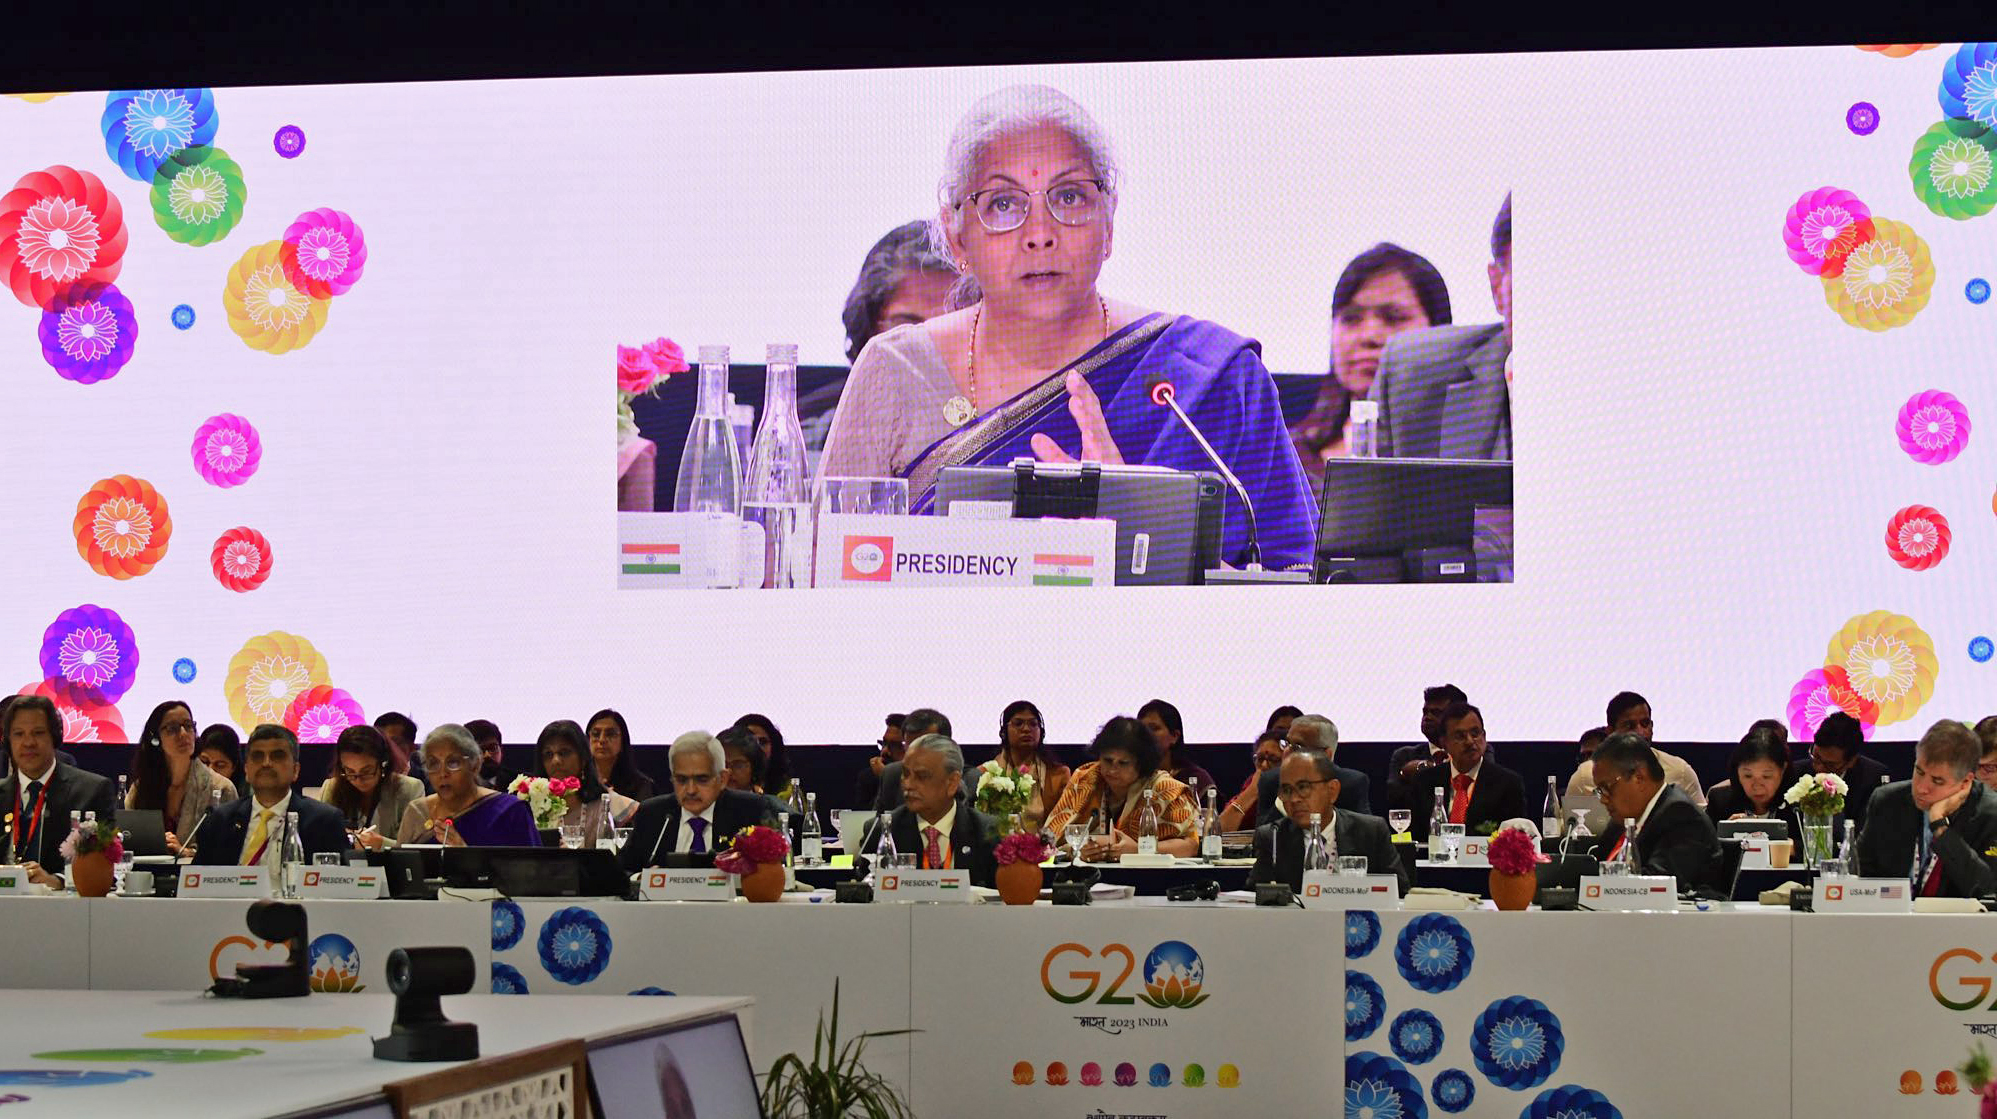 Nirmala Sitharaman chairs the 2nd session of the 4th and final G20 FMCBG meeting